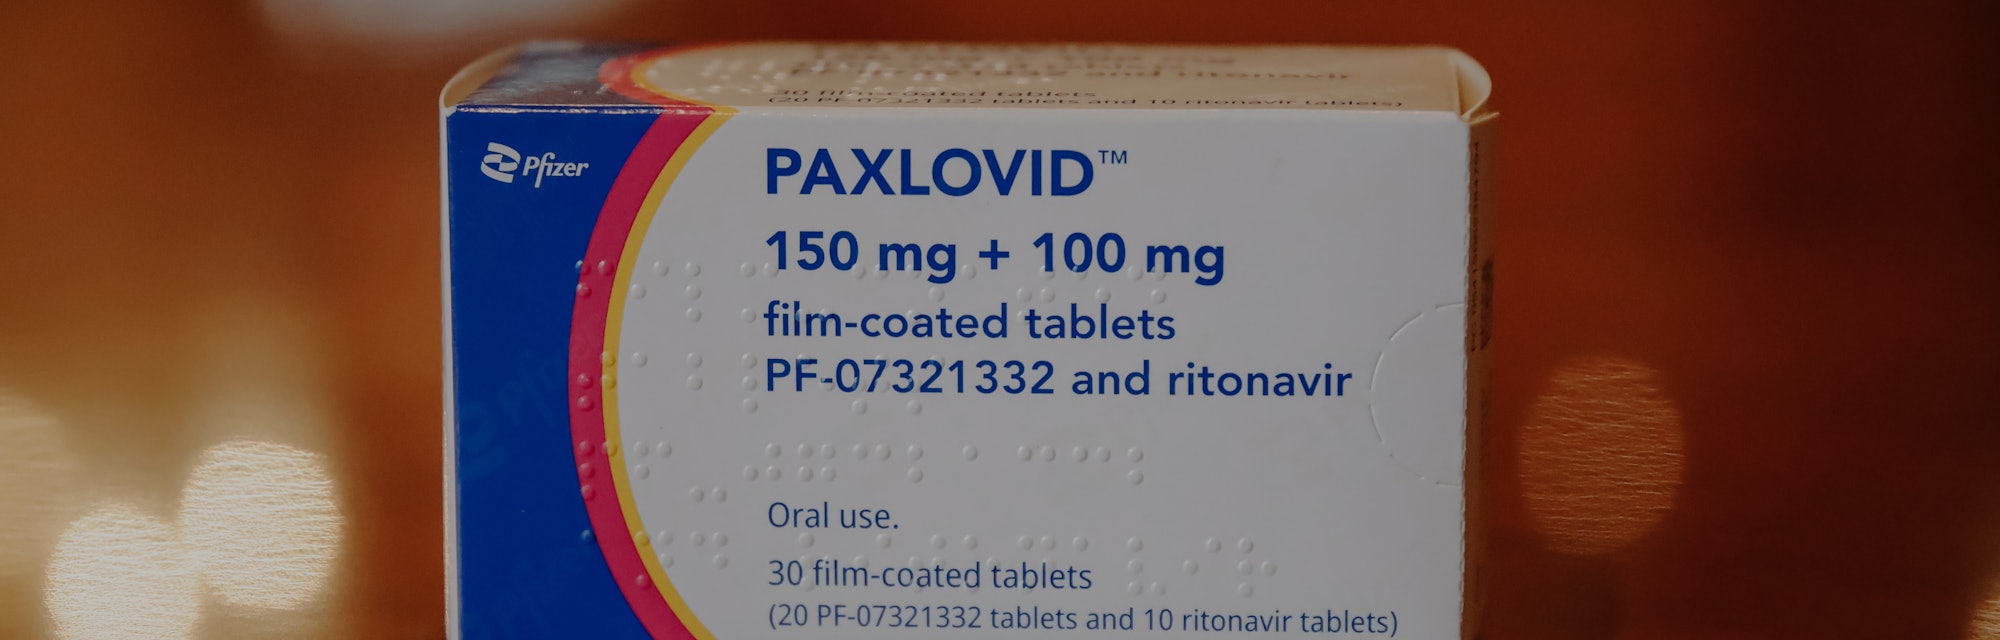 Some people who take the Pfizer oral antiviral for Covid-19, Paxlovid, experience rebound infections...